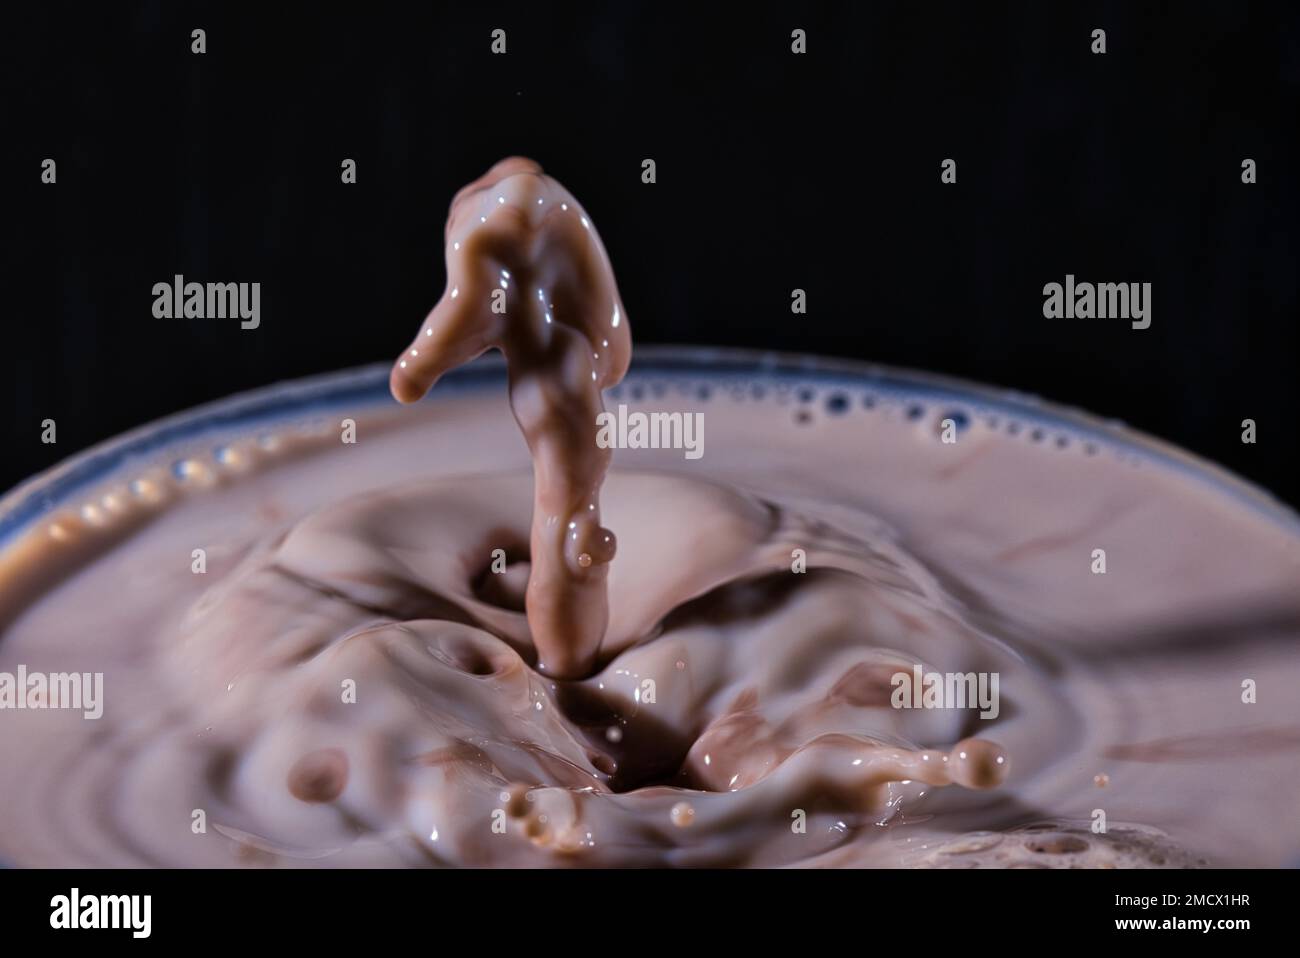 Drop photography with milk and cocoa, seahorse figure, high-speed shot Stock Photo